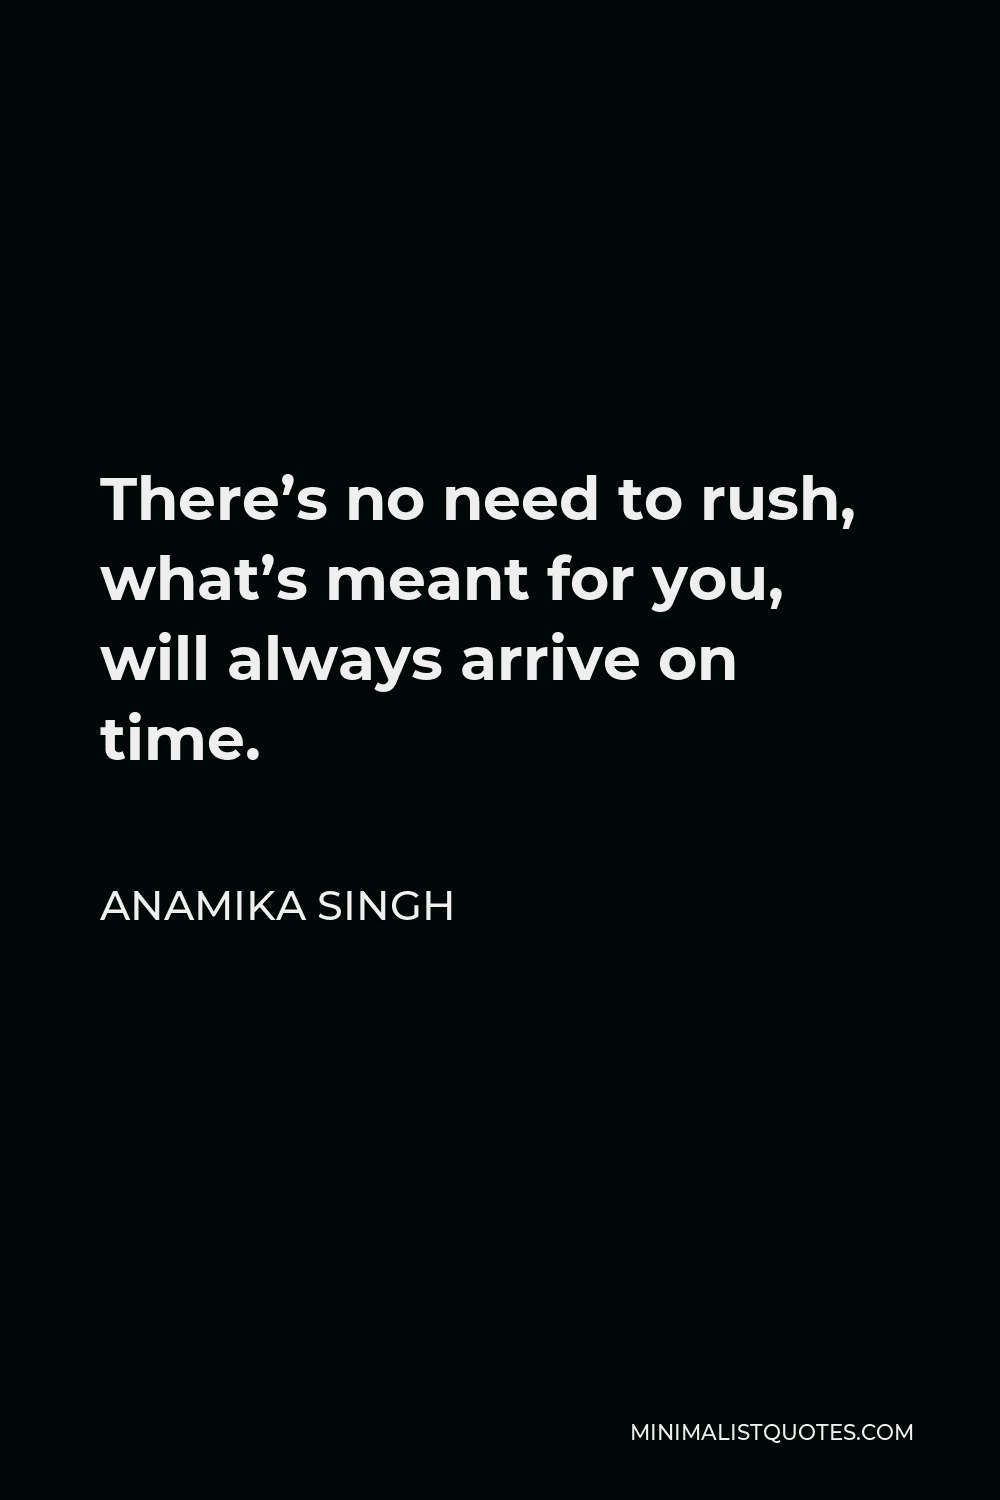 Anamika Singh Quote - There’s no need to rush, what’s meant for you, will always arrive on time.